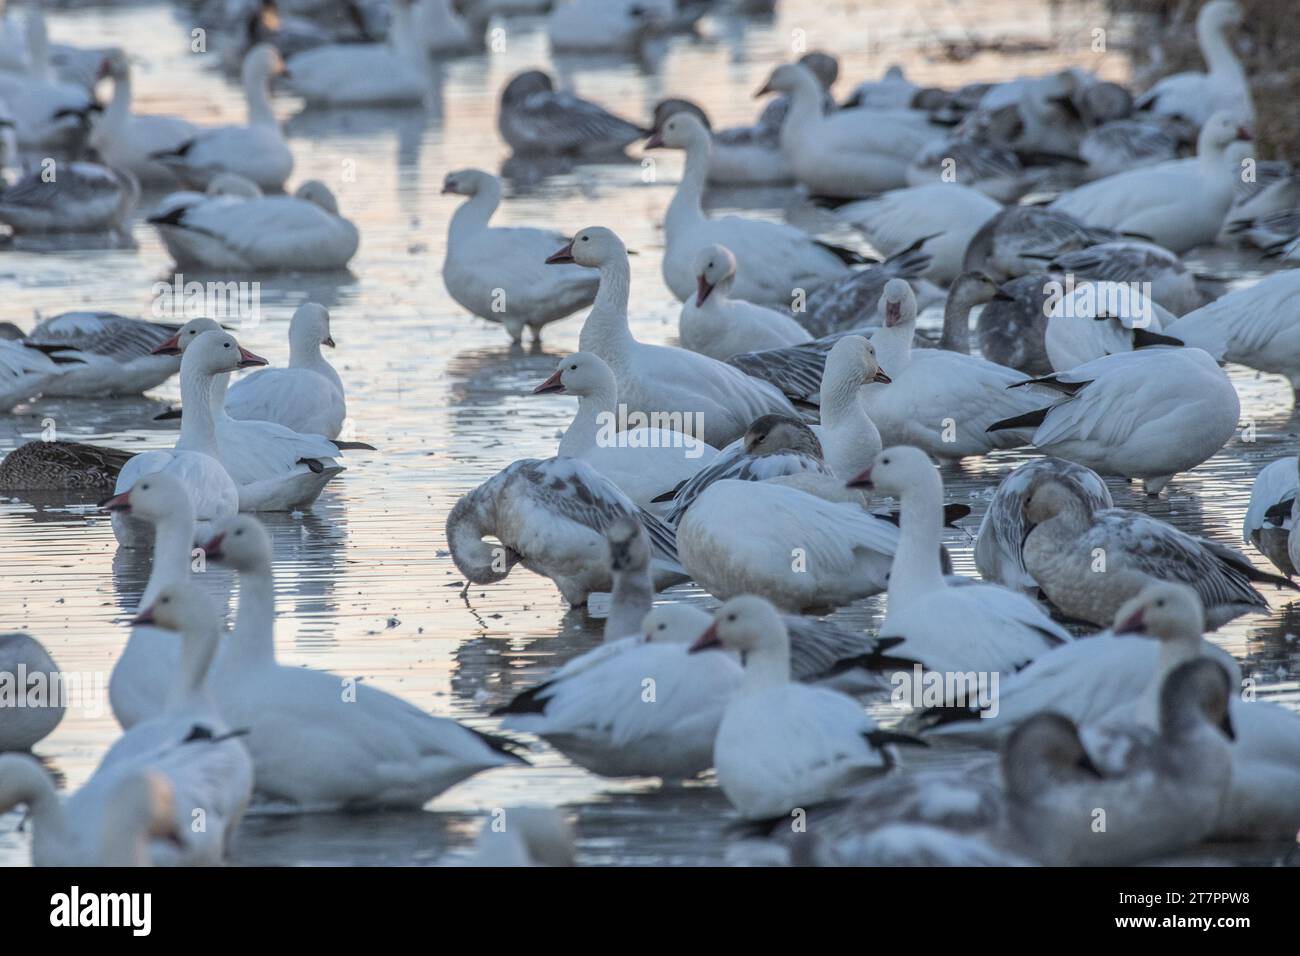 Snow geese, Anser caerulescens, on the water in a marsh in Sacramento Wildlife refuge in the central valley in California. Stock Photo